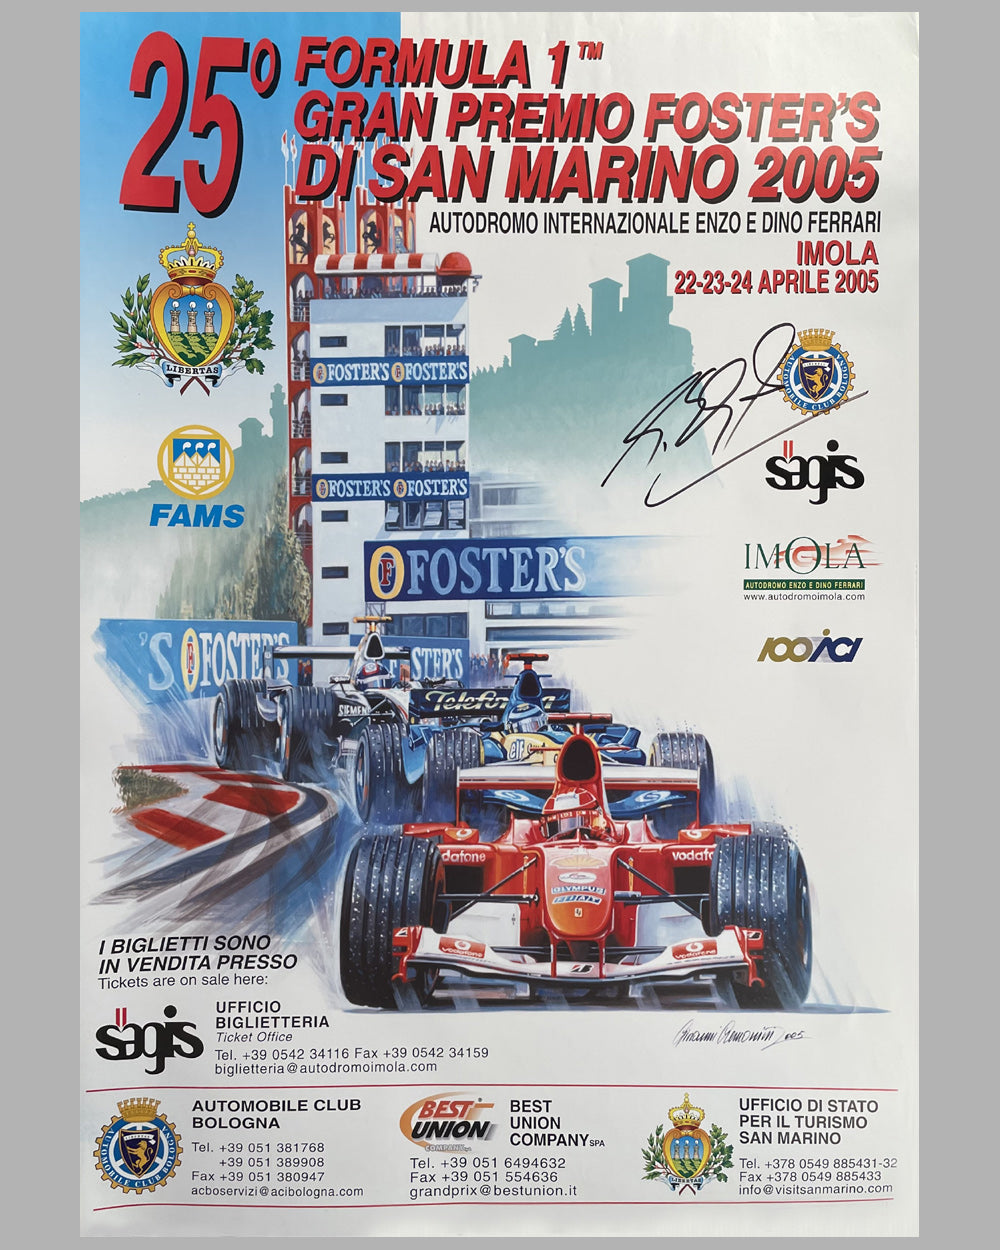 2005 G.P. of Imola official poster, autographed